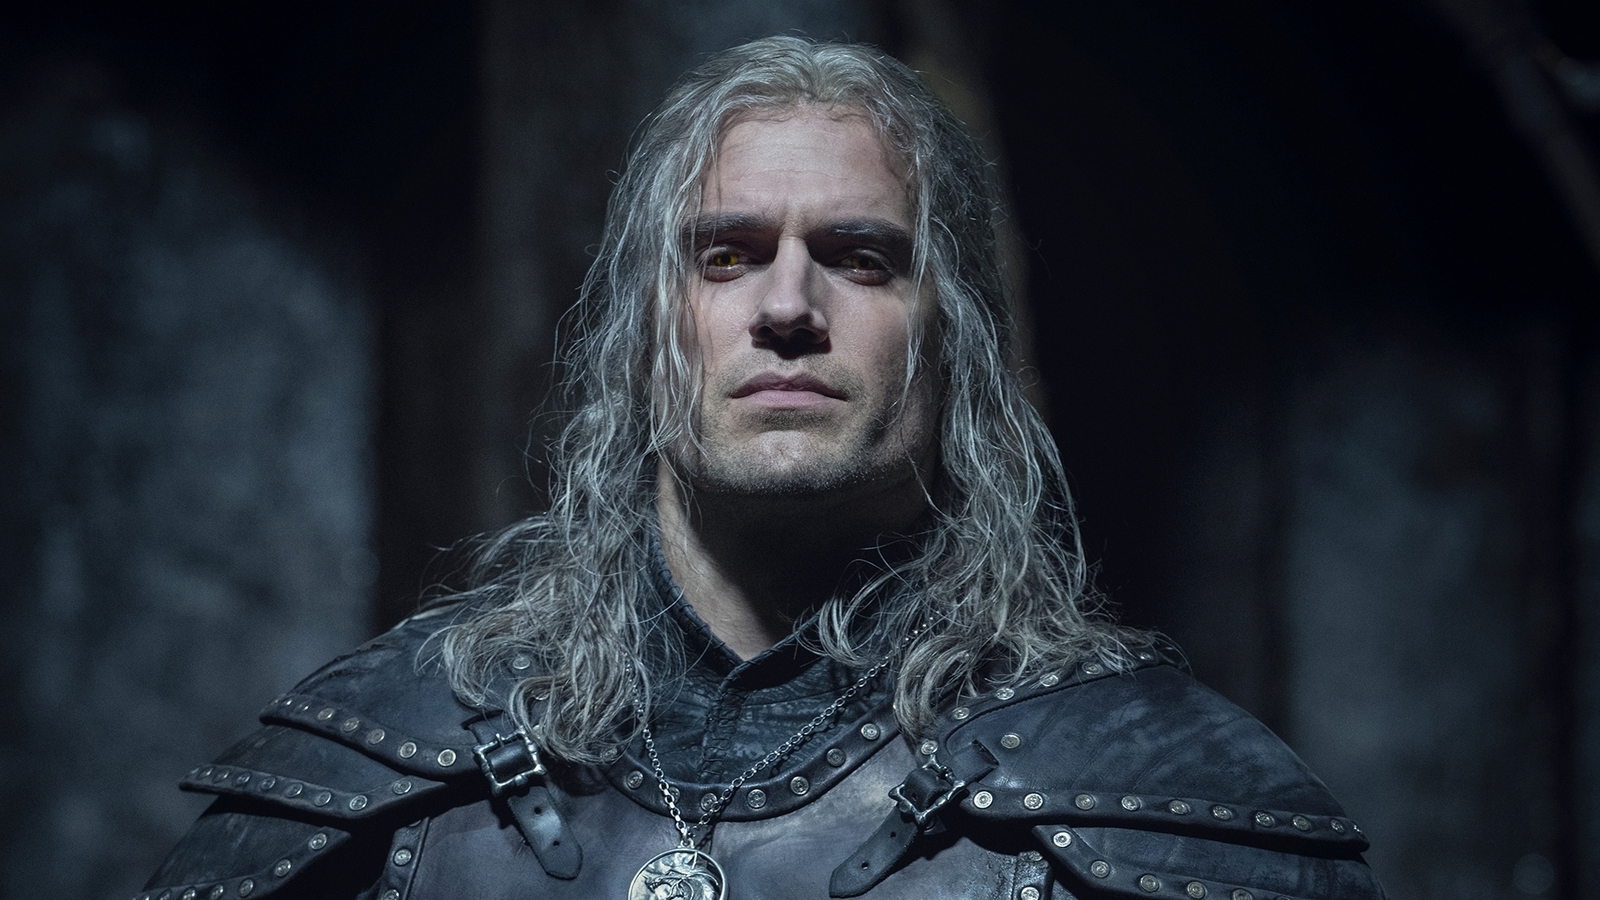 The Witcher 3, the showrunner anticipates 'an epic revelation about the villain'